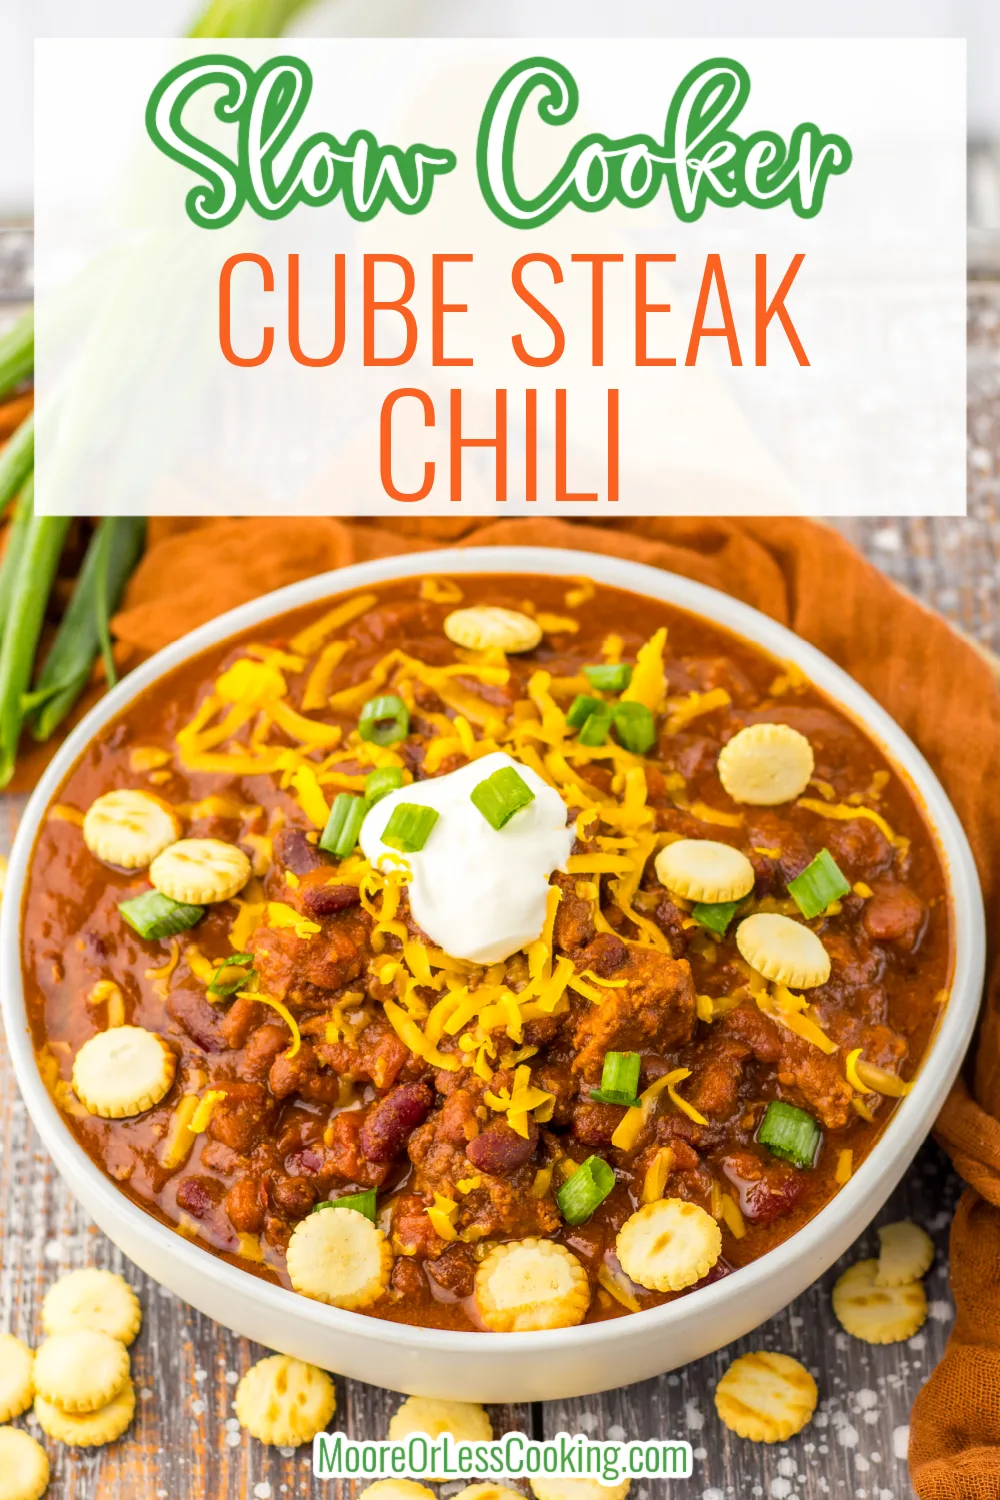 If you're looking for an easy, meaty and outrageously tasty chili recipe, this is it! My Slow Cooker Cube Steak Chili is an effortless way to make a satisfying meal that's always a family favorite. With minimal ingredients, a slow cooker and tons of free time to do other things, it also the perfect recipe for meal planning and freezing for later. via @Mooreorlesscook